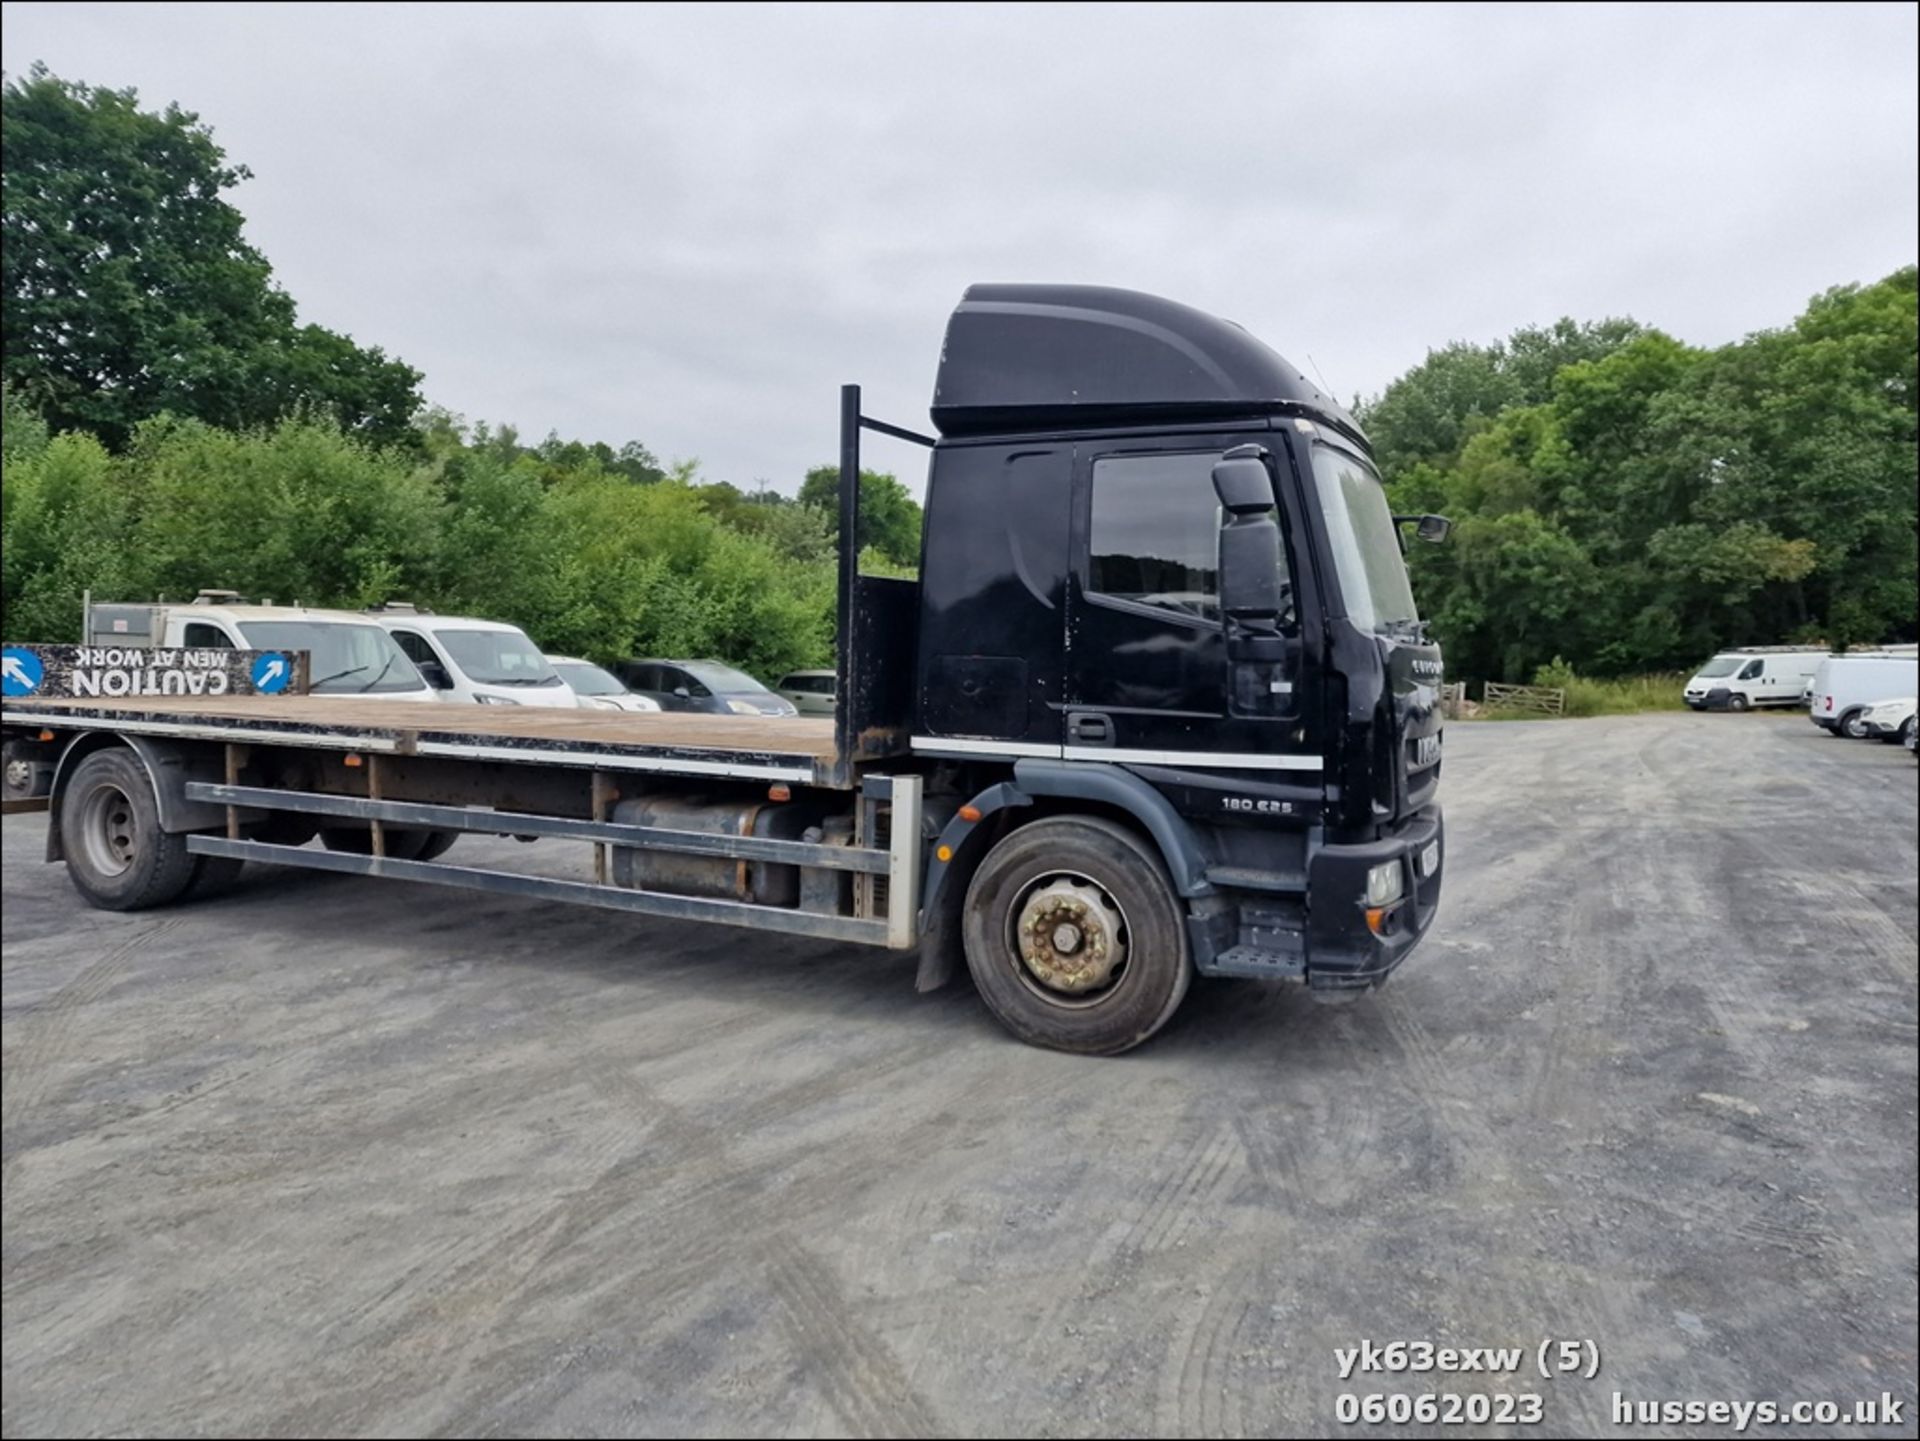 13/63 IVECO EUROCARGO (MY 2008) - 5880cc 2dr Flat Bed (Black) - Image 5 of 21